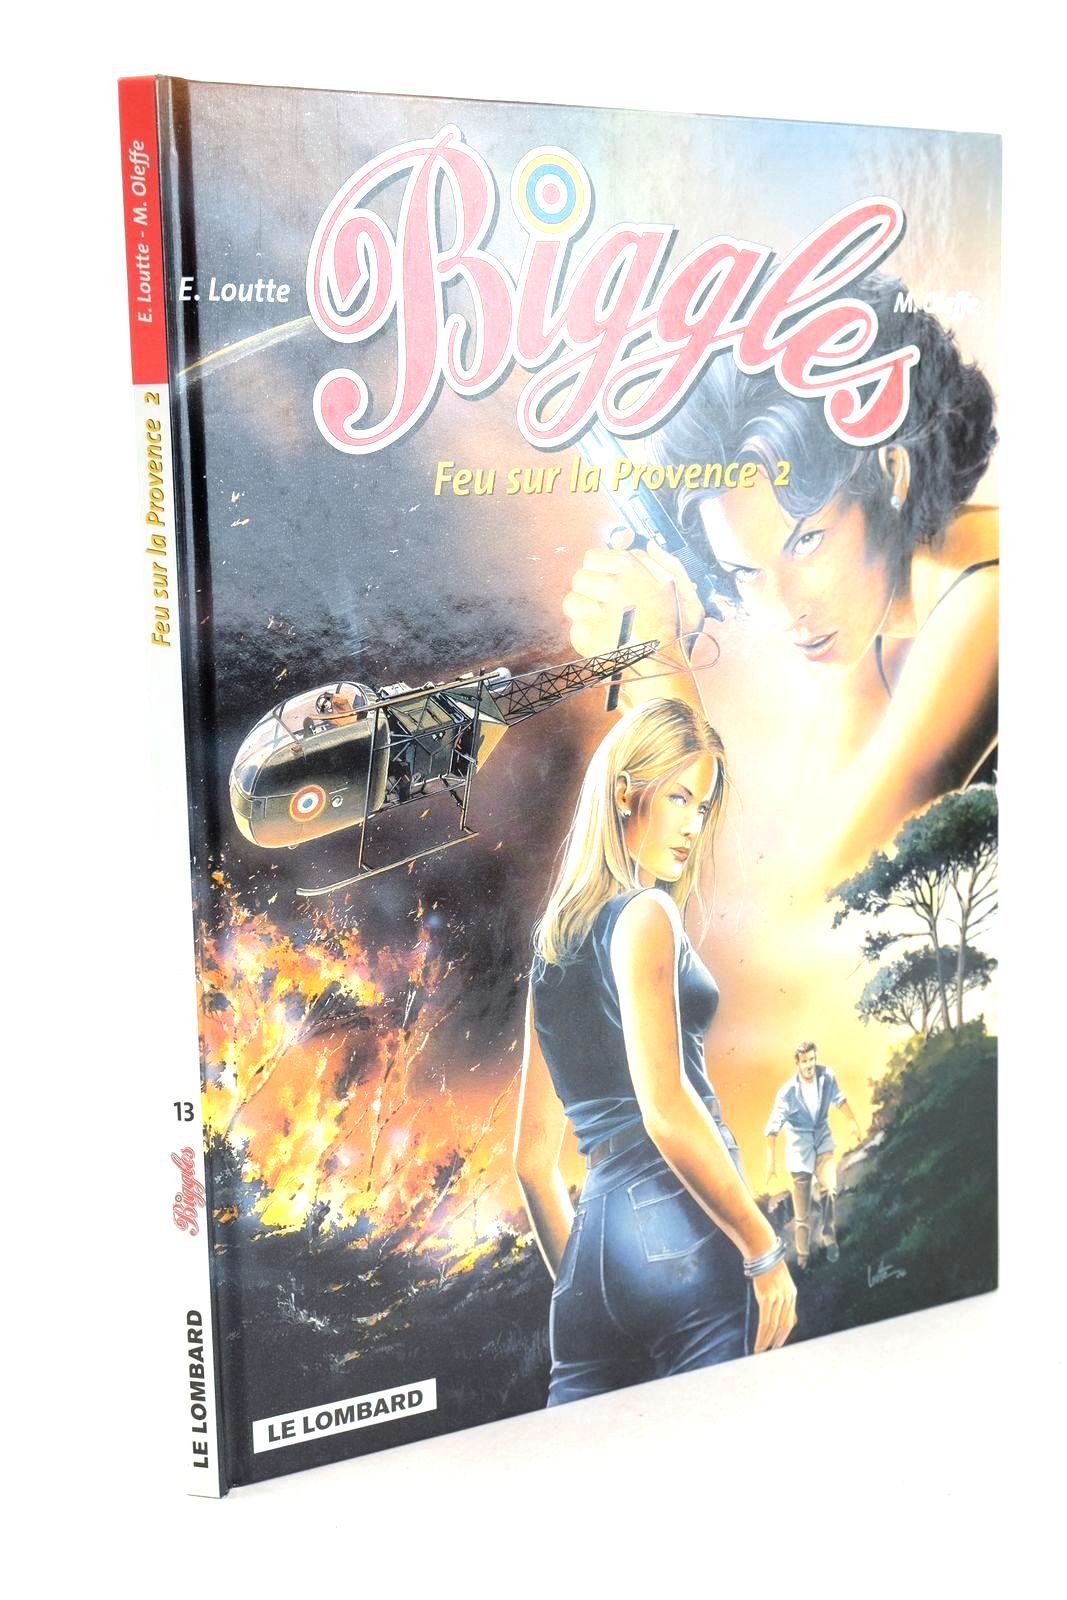 Photo of BIGGLES FEU SUR LA PROVENCE 2 written by Johns, W.E. Oleffe, Michel illustrated by Loutte, Eric published by Editions Du Lombard (STOCK CODE: 1326325)  for sale by Stella & Rose's Books